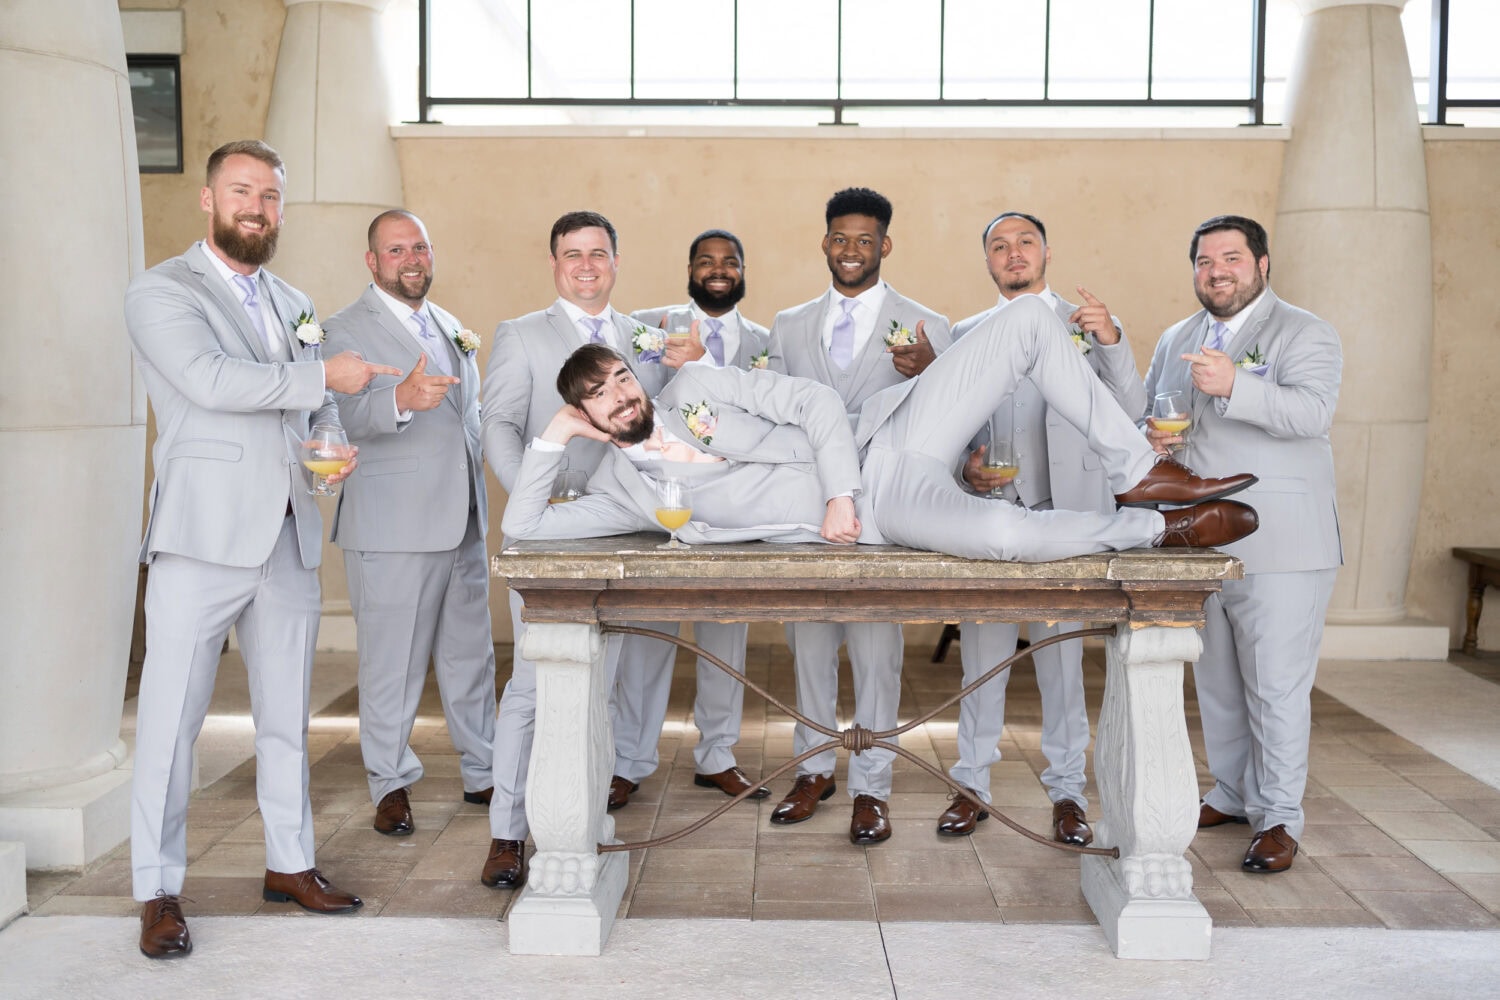 Groomsmen pictures in the courtyard and gazebo - 21 Main Events